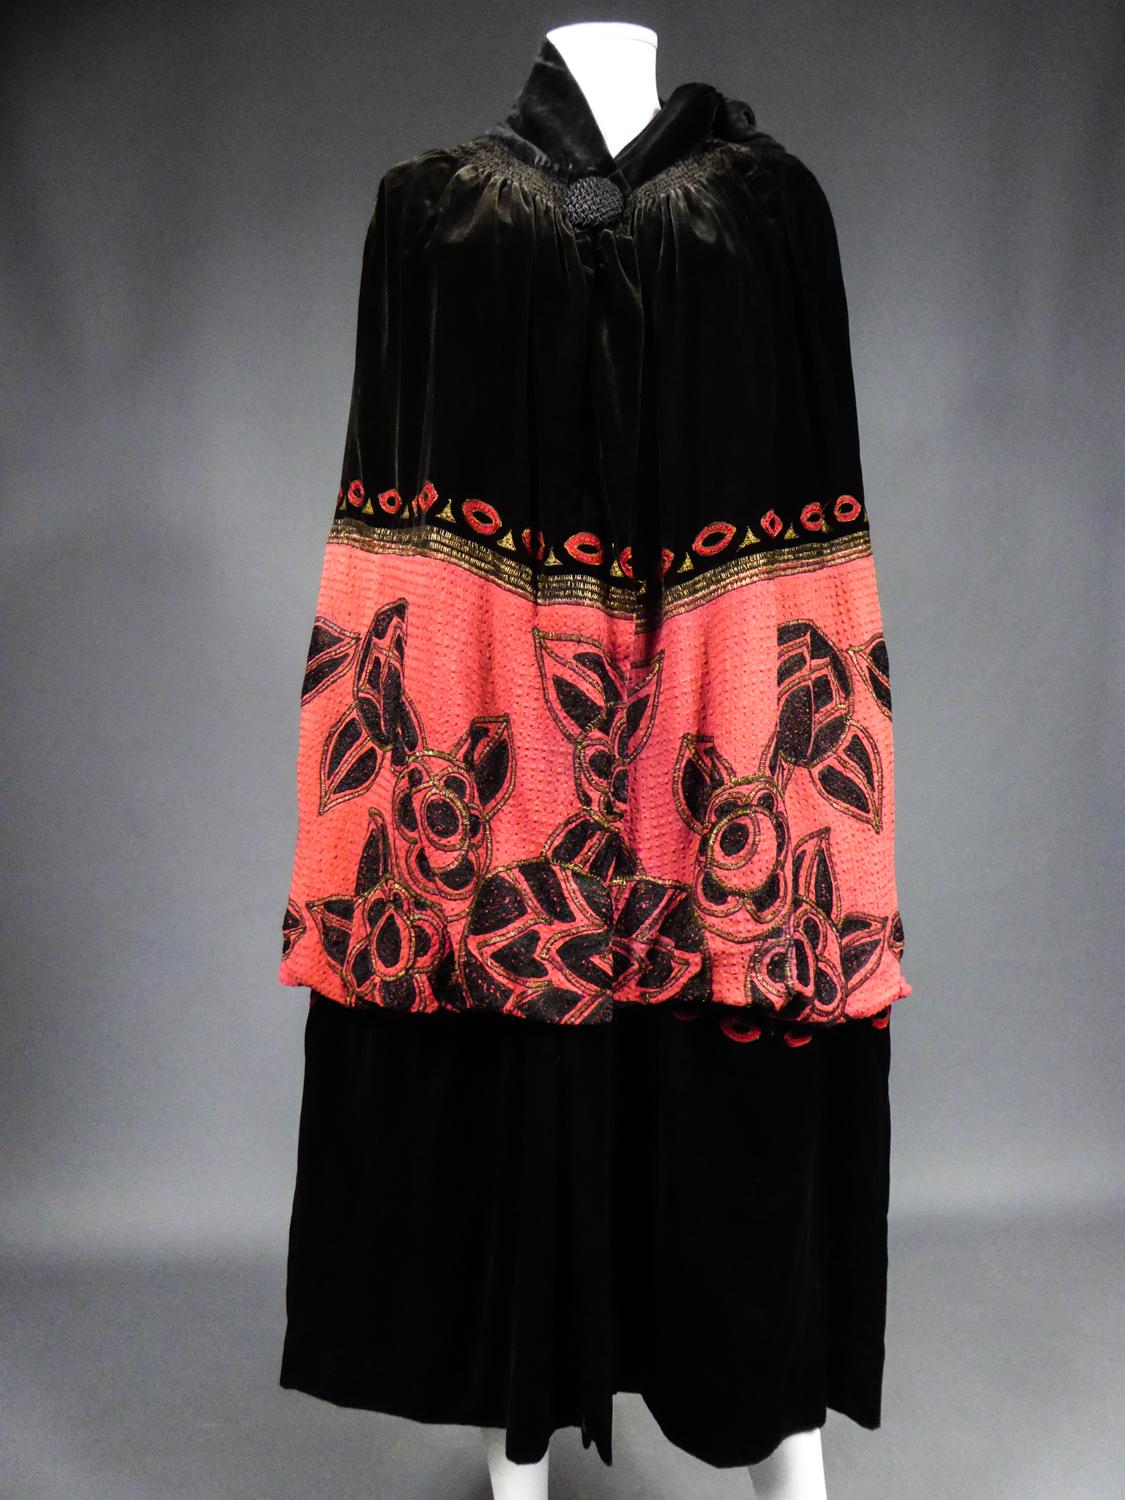 Circa 1920/1925
France

Long evening cape in black silk velvet and Fuschia cotton embroidered by the famous designer house Revillon Frère and dating from the Art Deco period. It is one of the oldest French designer houses founded in 1839 and known